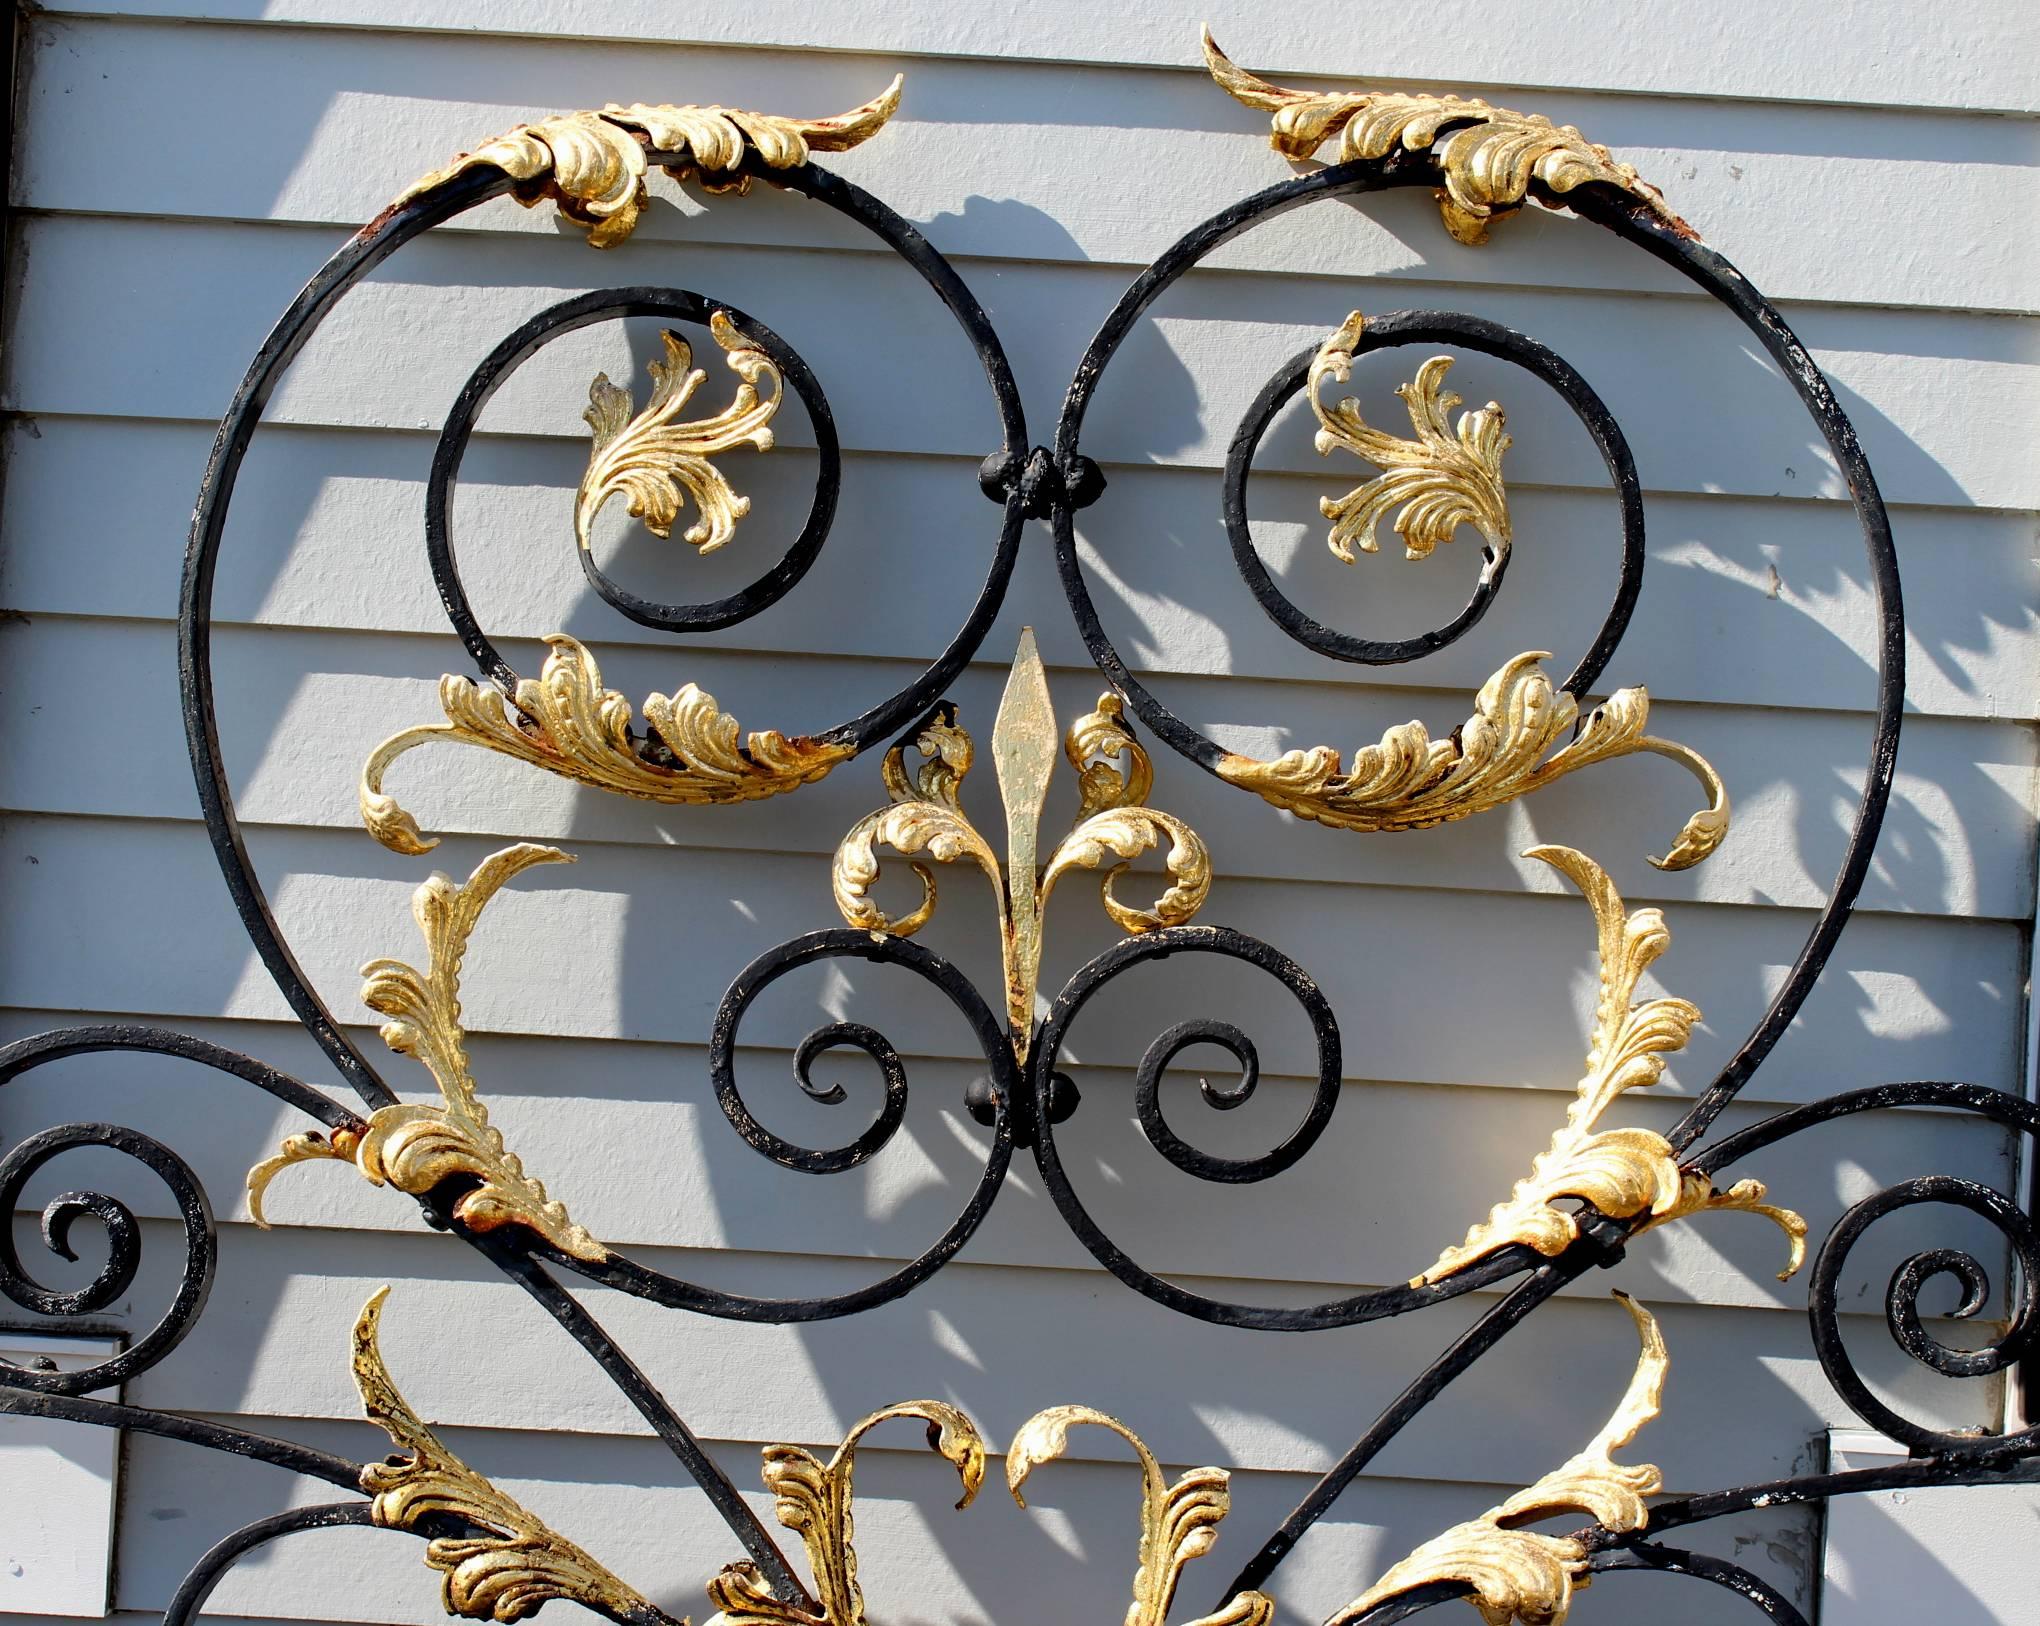 A monumental Victorian iron gate crest in black with exceptional scrollwork and gilt applied foliate highlights, including two rosettes, a central heart, and a fleur-de-lis, all surmounting a small circular central scroll decoration between the